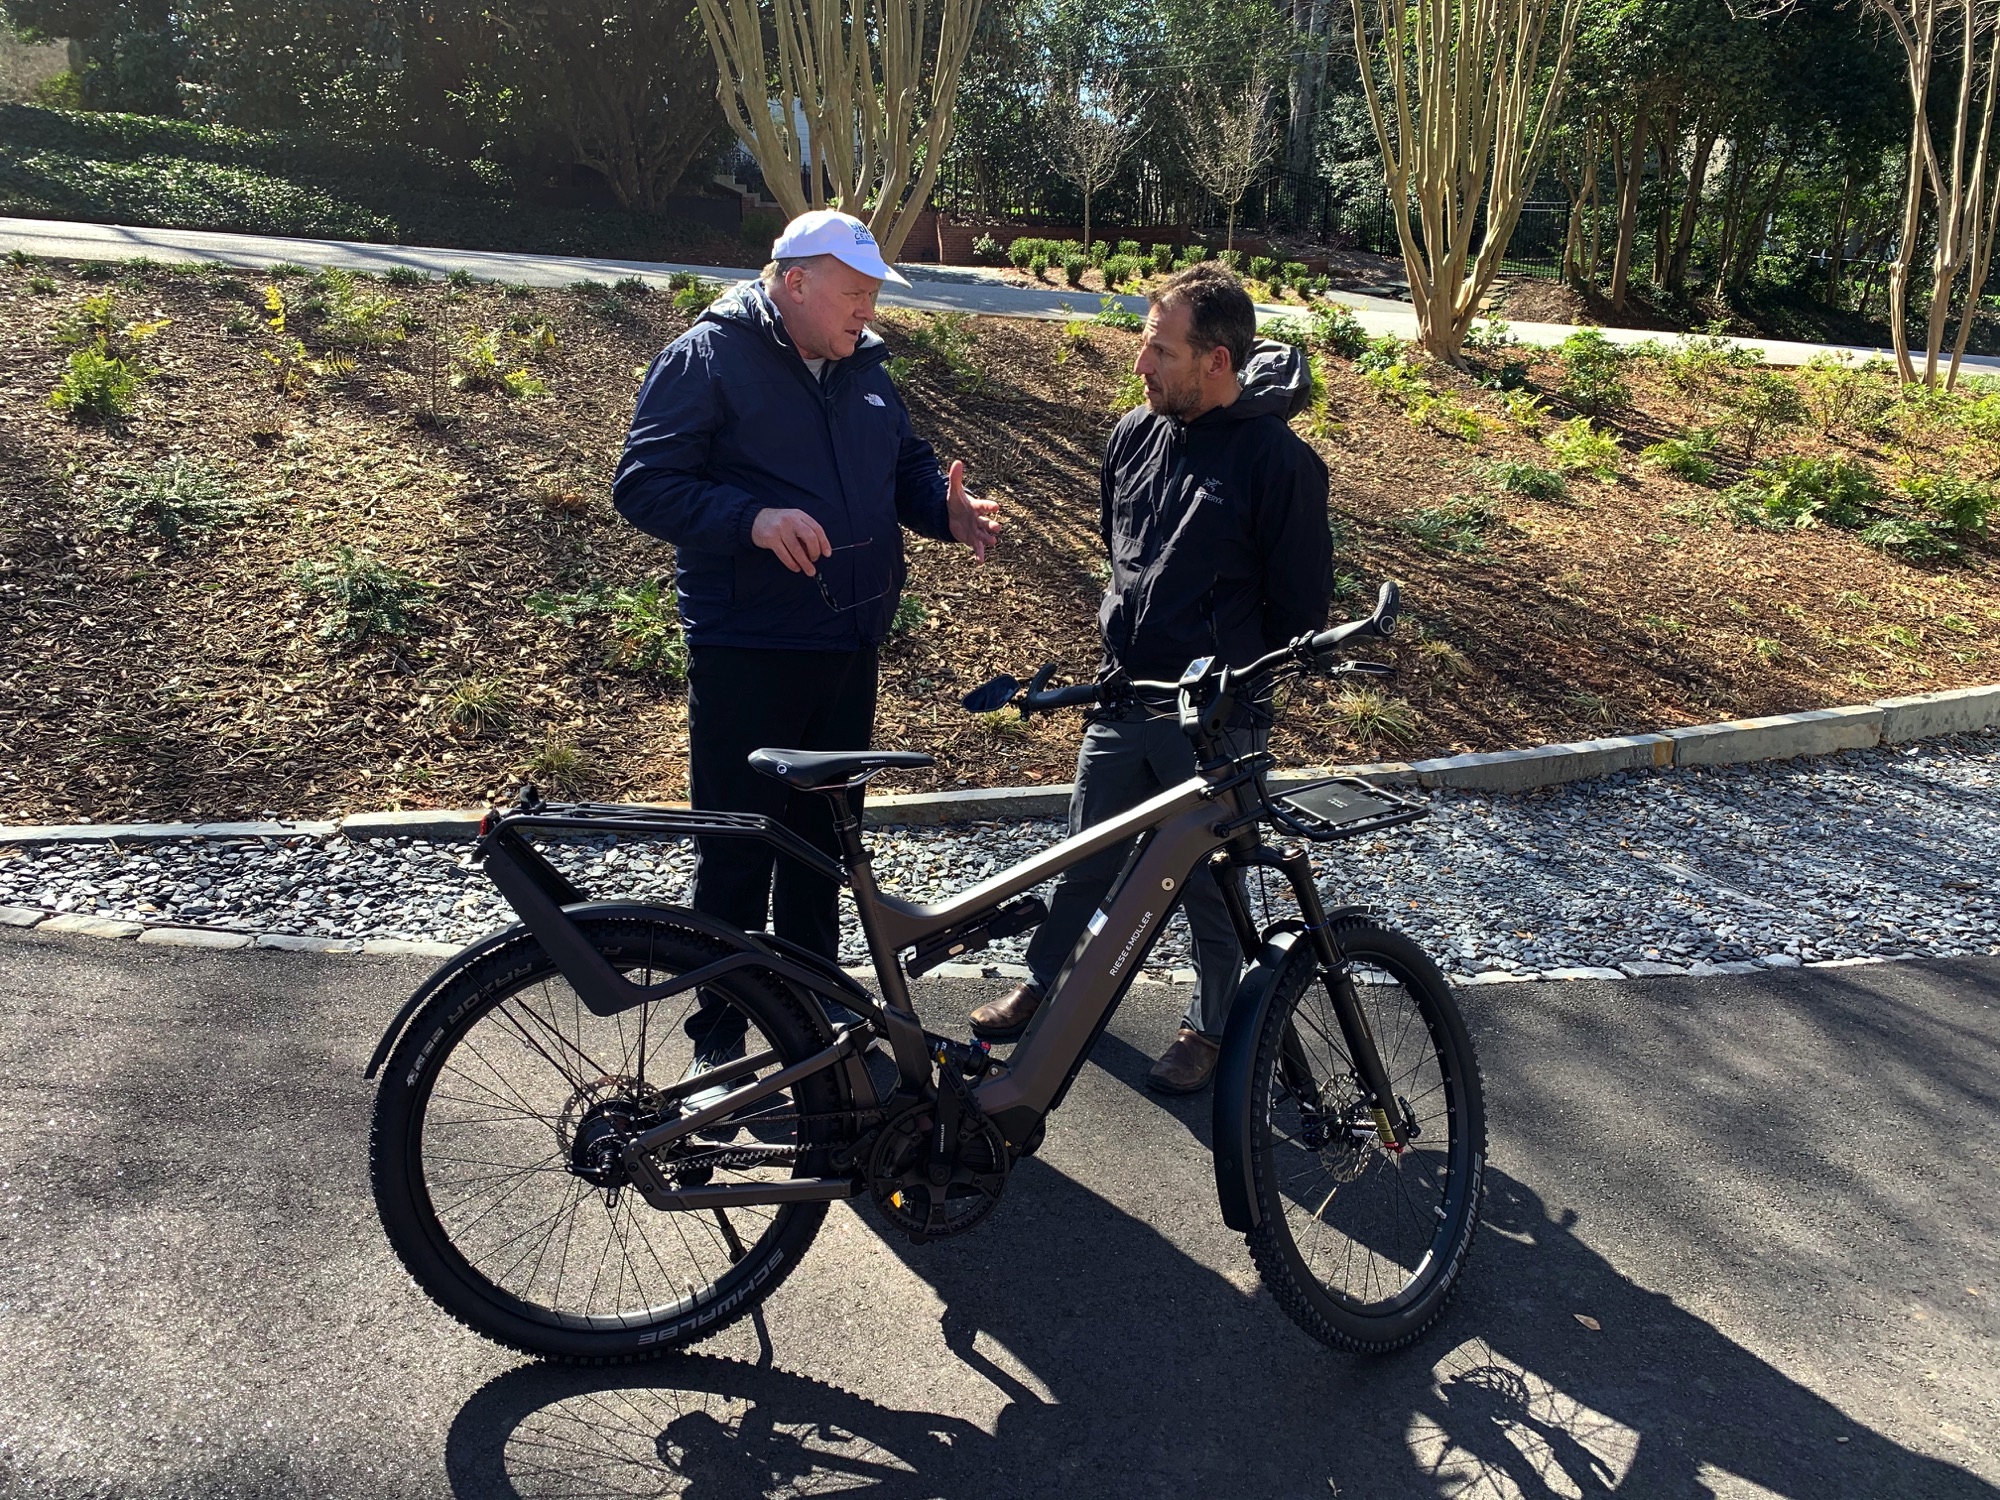 eBike Central's Joe Michel with Hal in Greenville SC